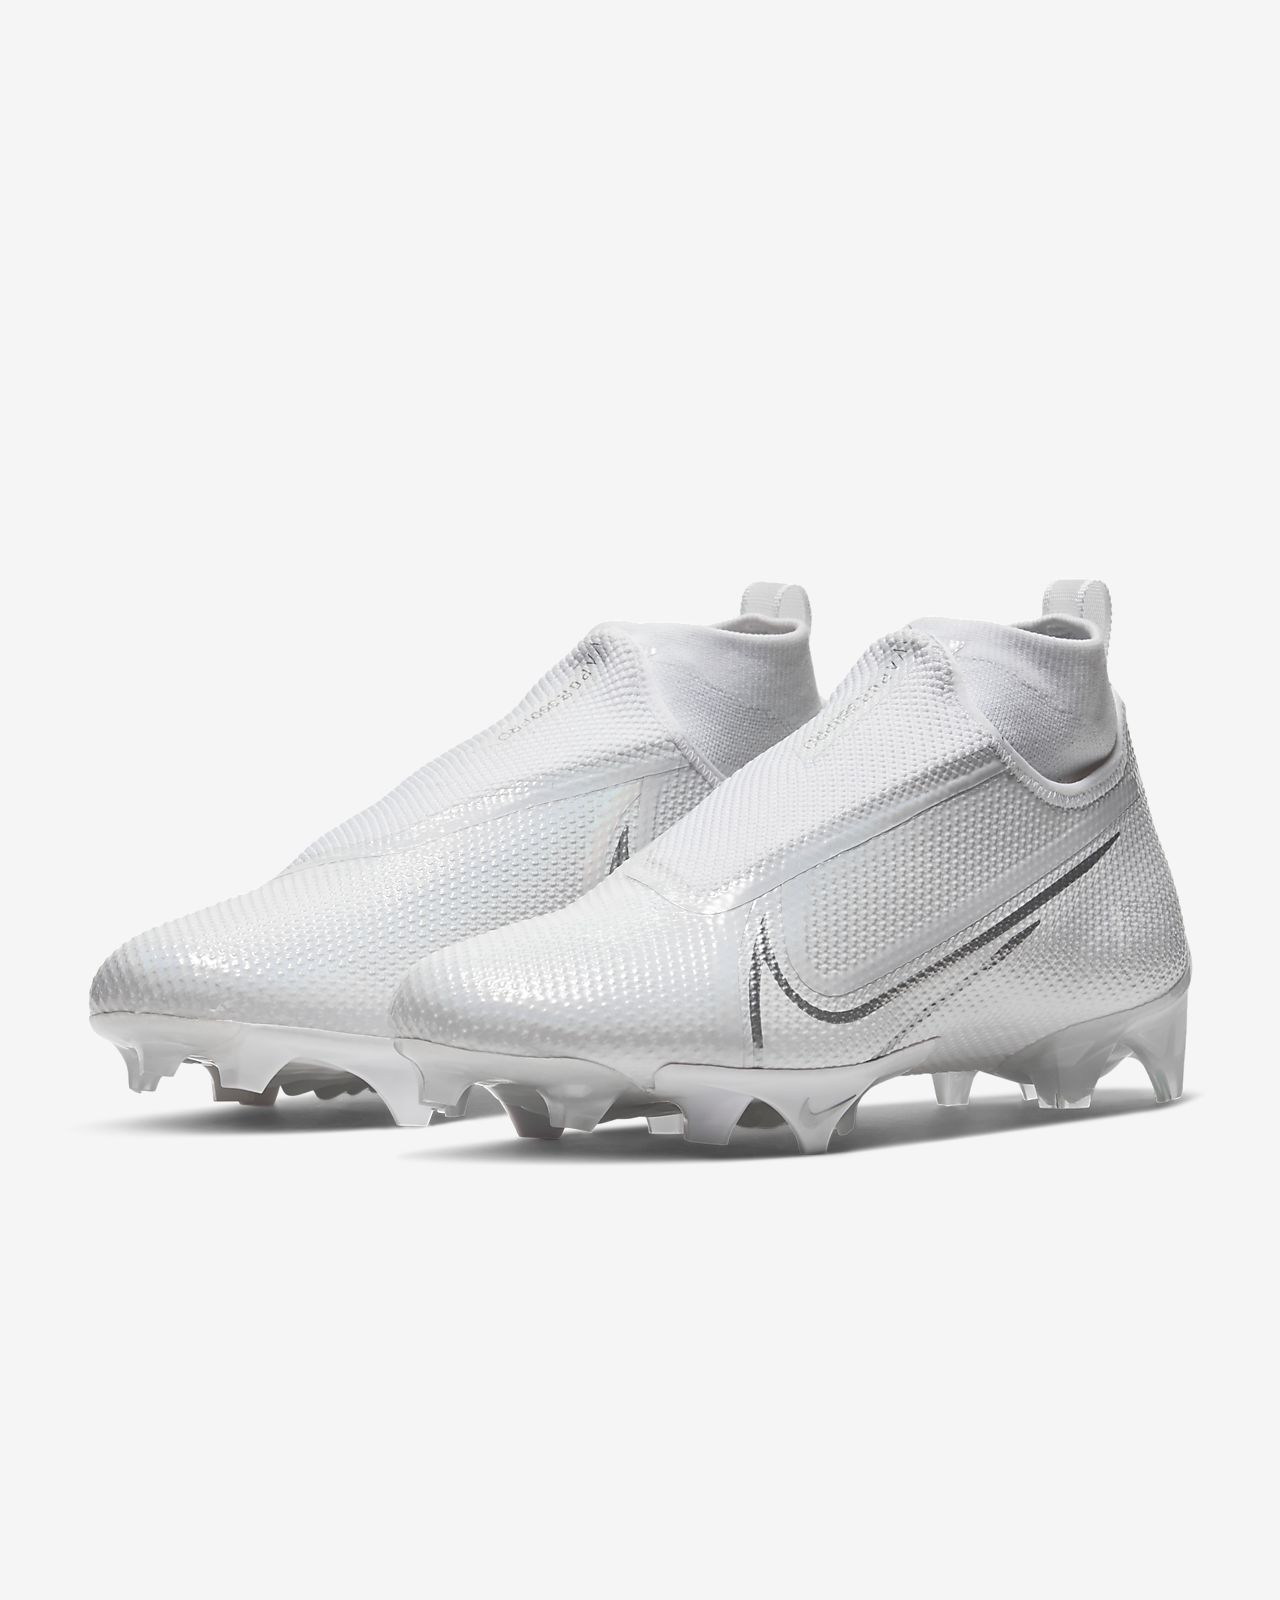 nike pro cleats Cheap Soccer Cleats 